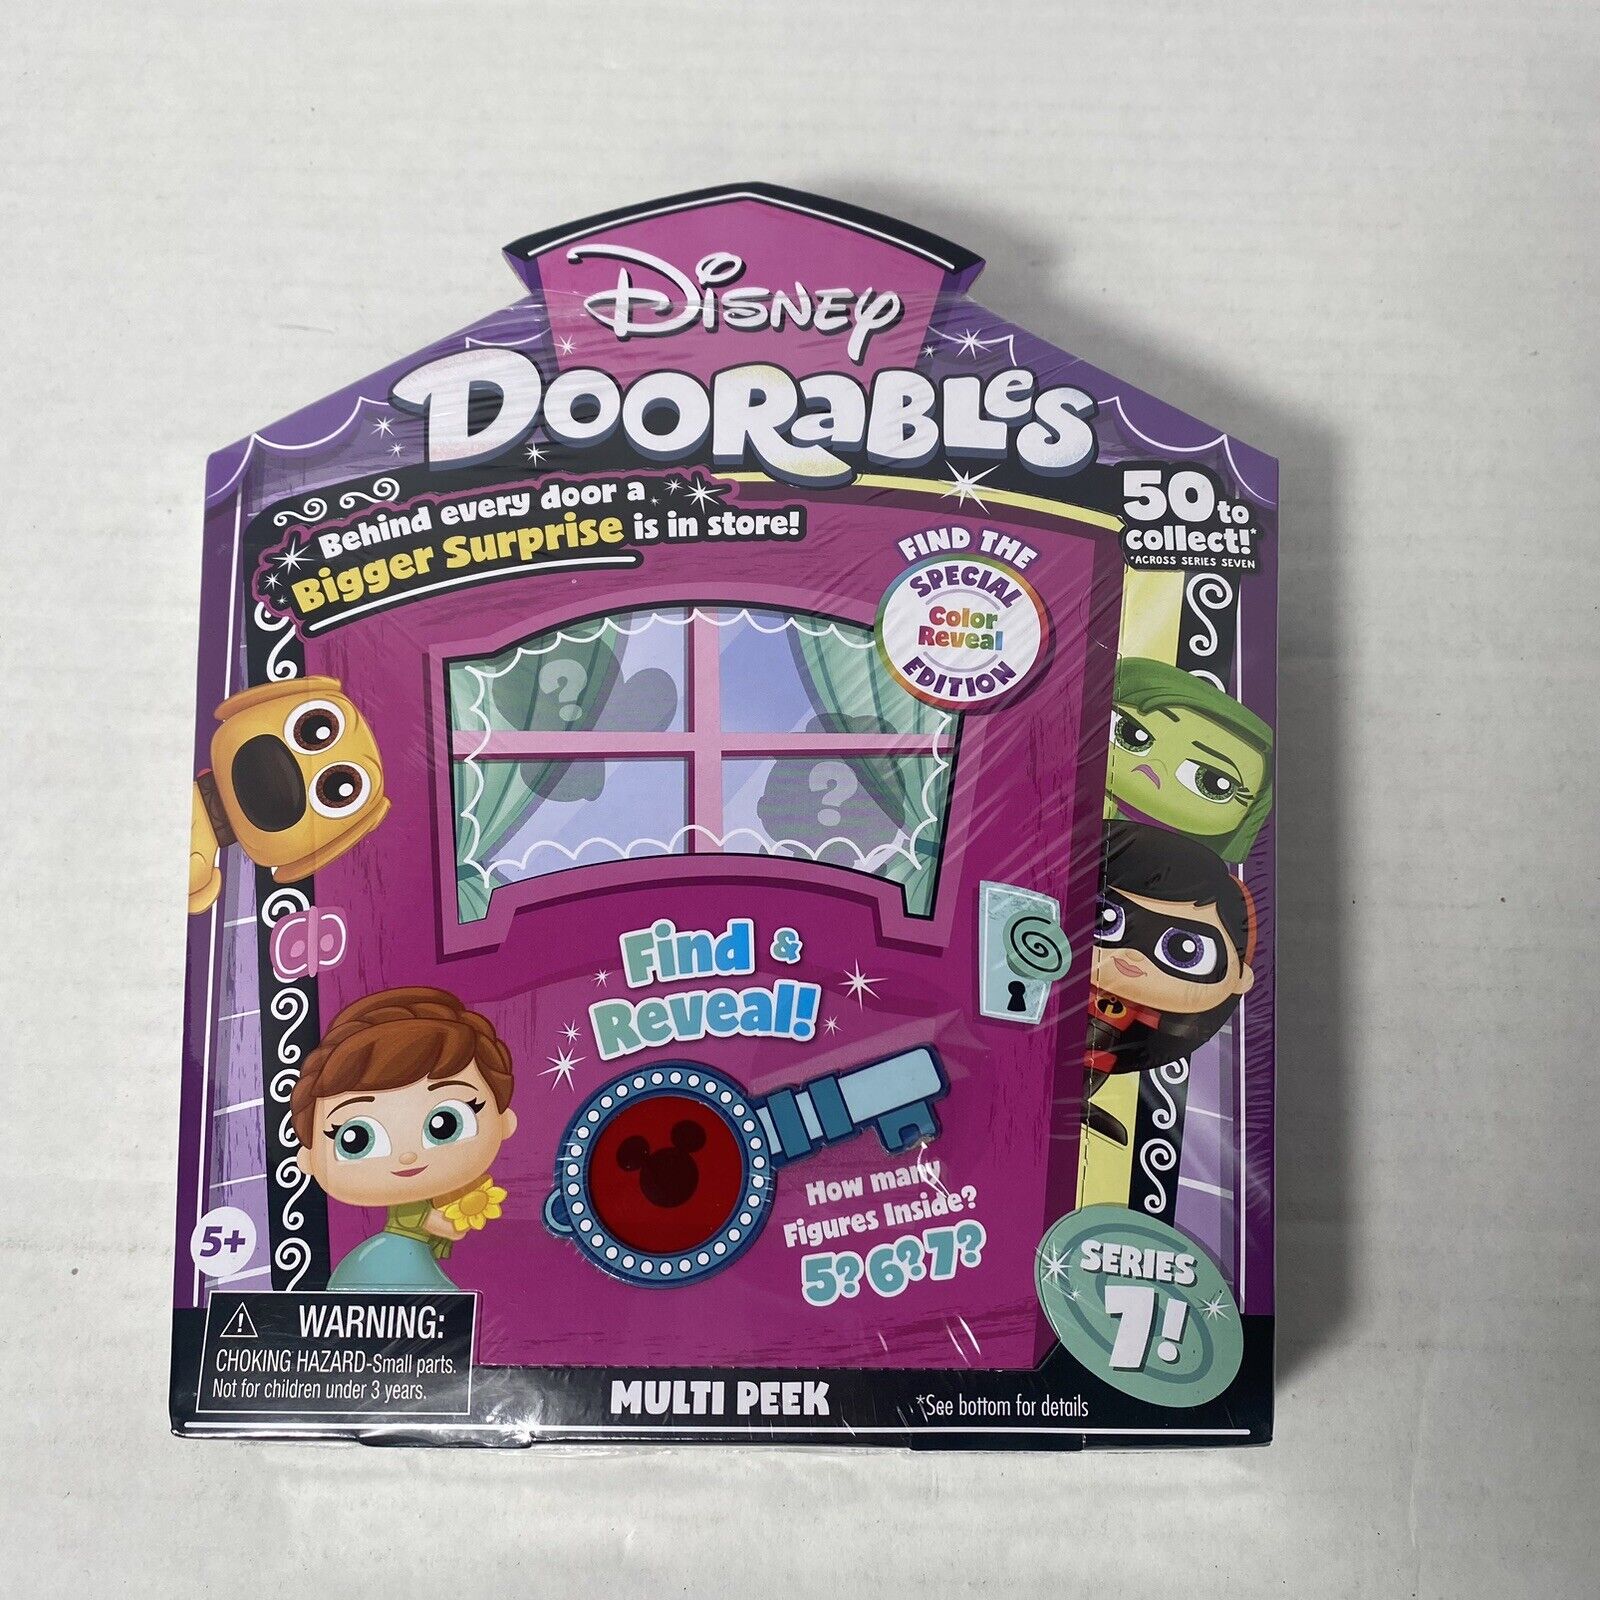 Disney doorables multi peek series color reveal special edition new ships fast